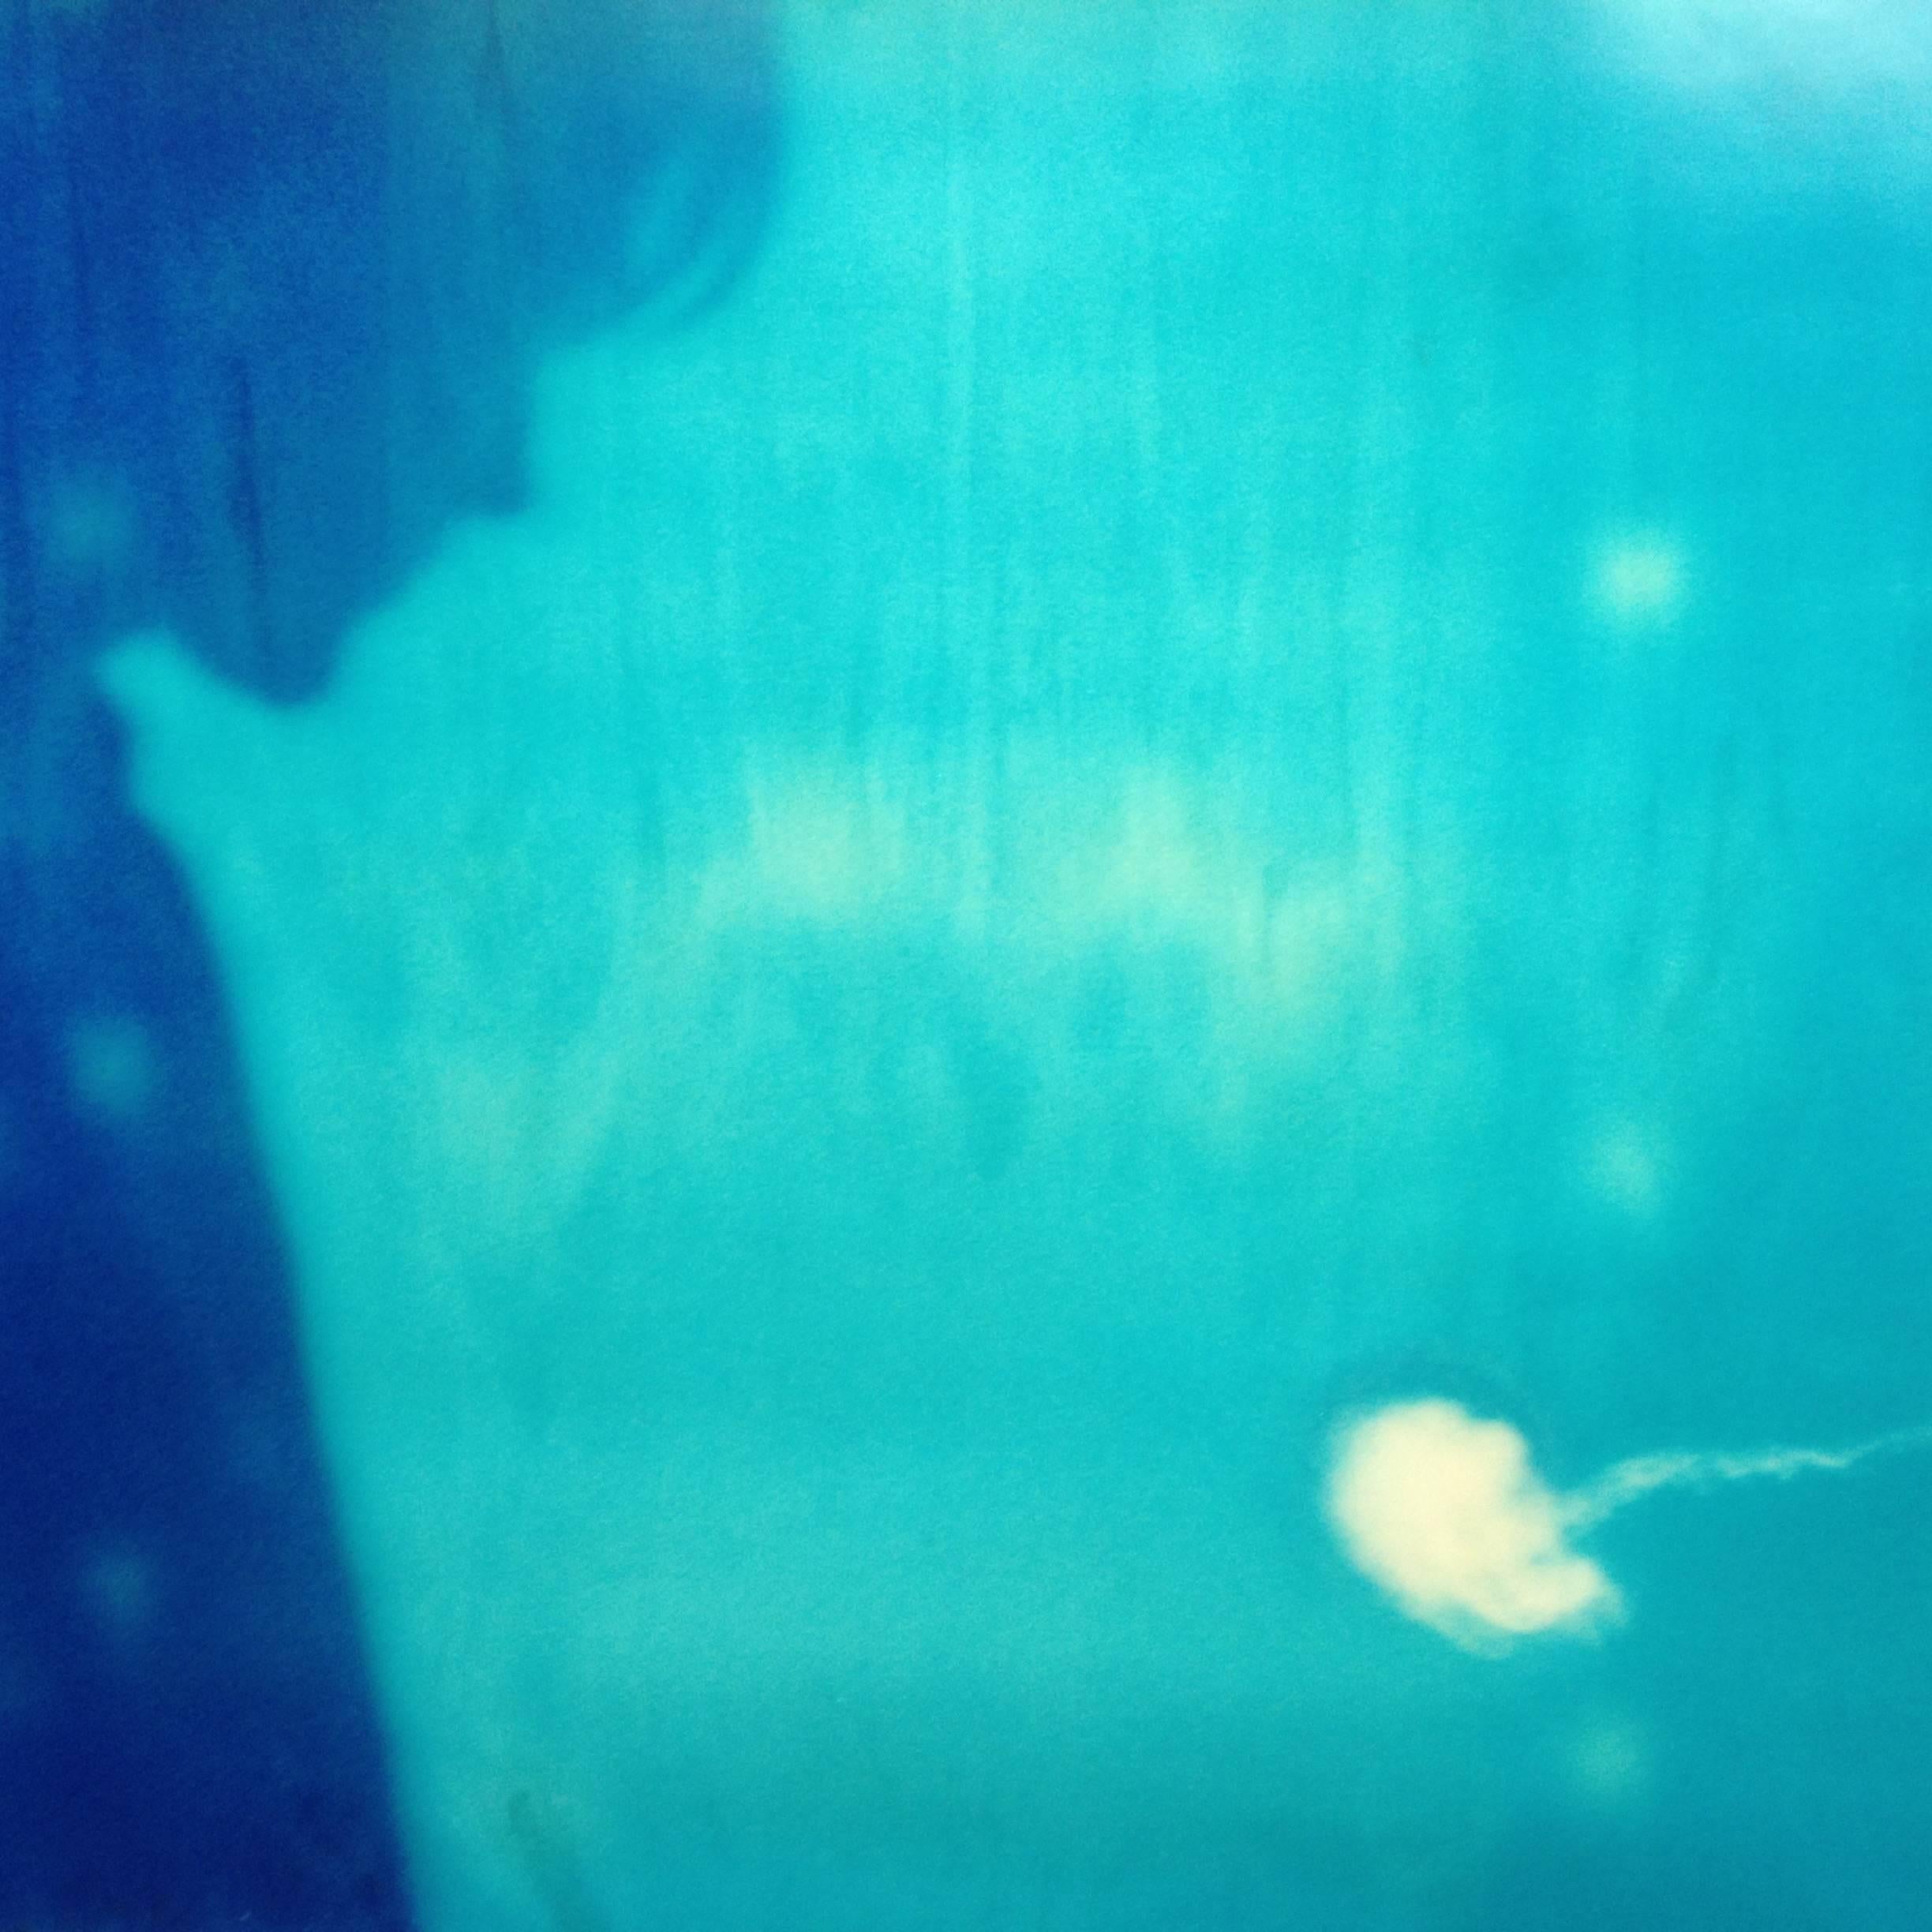 Stefanie Schneider Abstract Photograph - Jelly Fish - Contemporary, Expired, Polaroid, Photograph, Abstract, Ryan Gosling